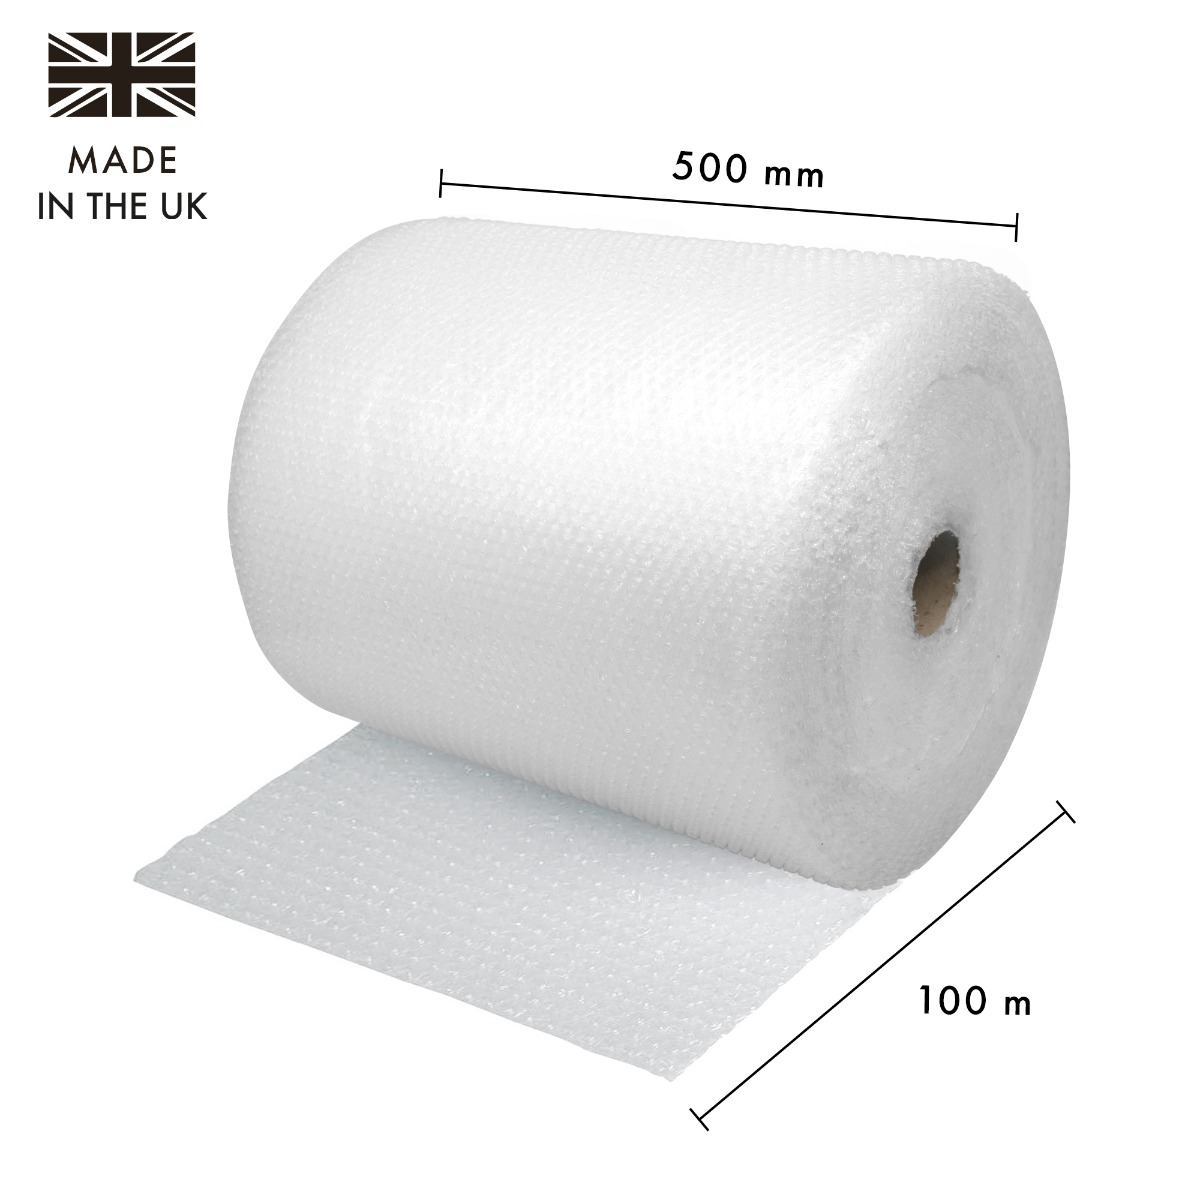 Protective Bubble Wrap 500mm x 100m - Pukka Post & Packaging